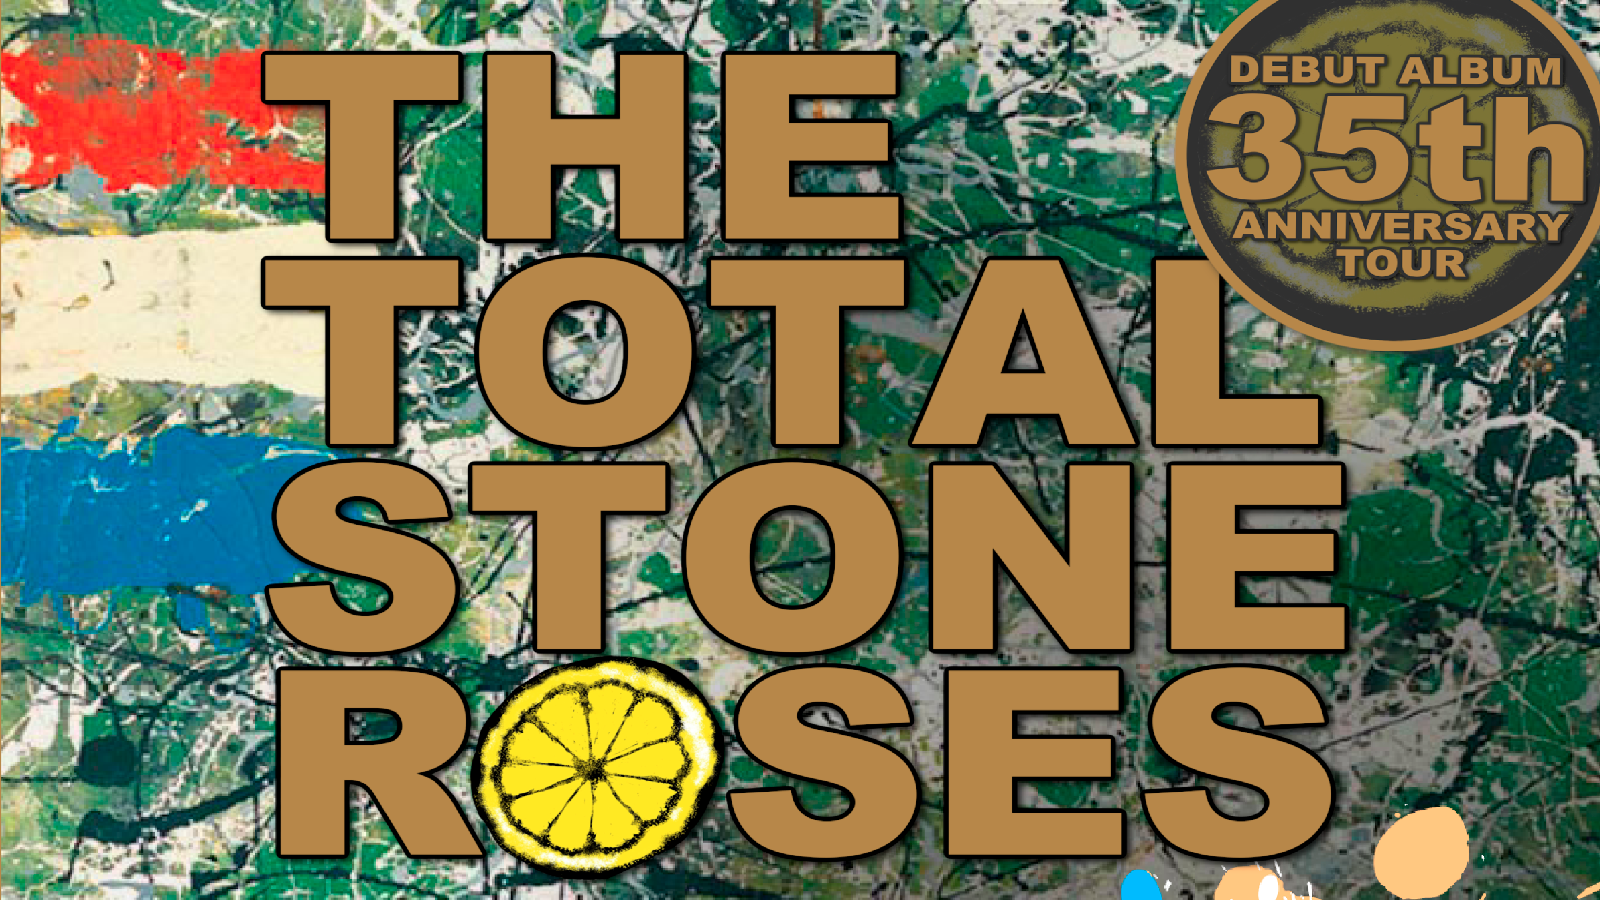 The Total Stone Roses + support from Oaysis – LIVE